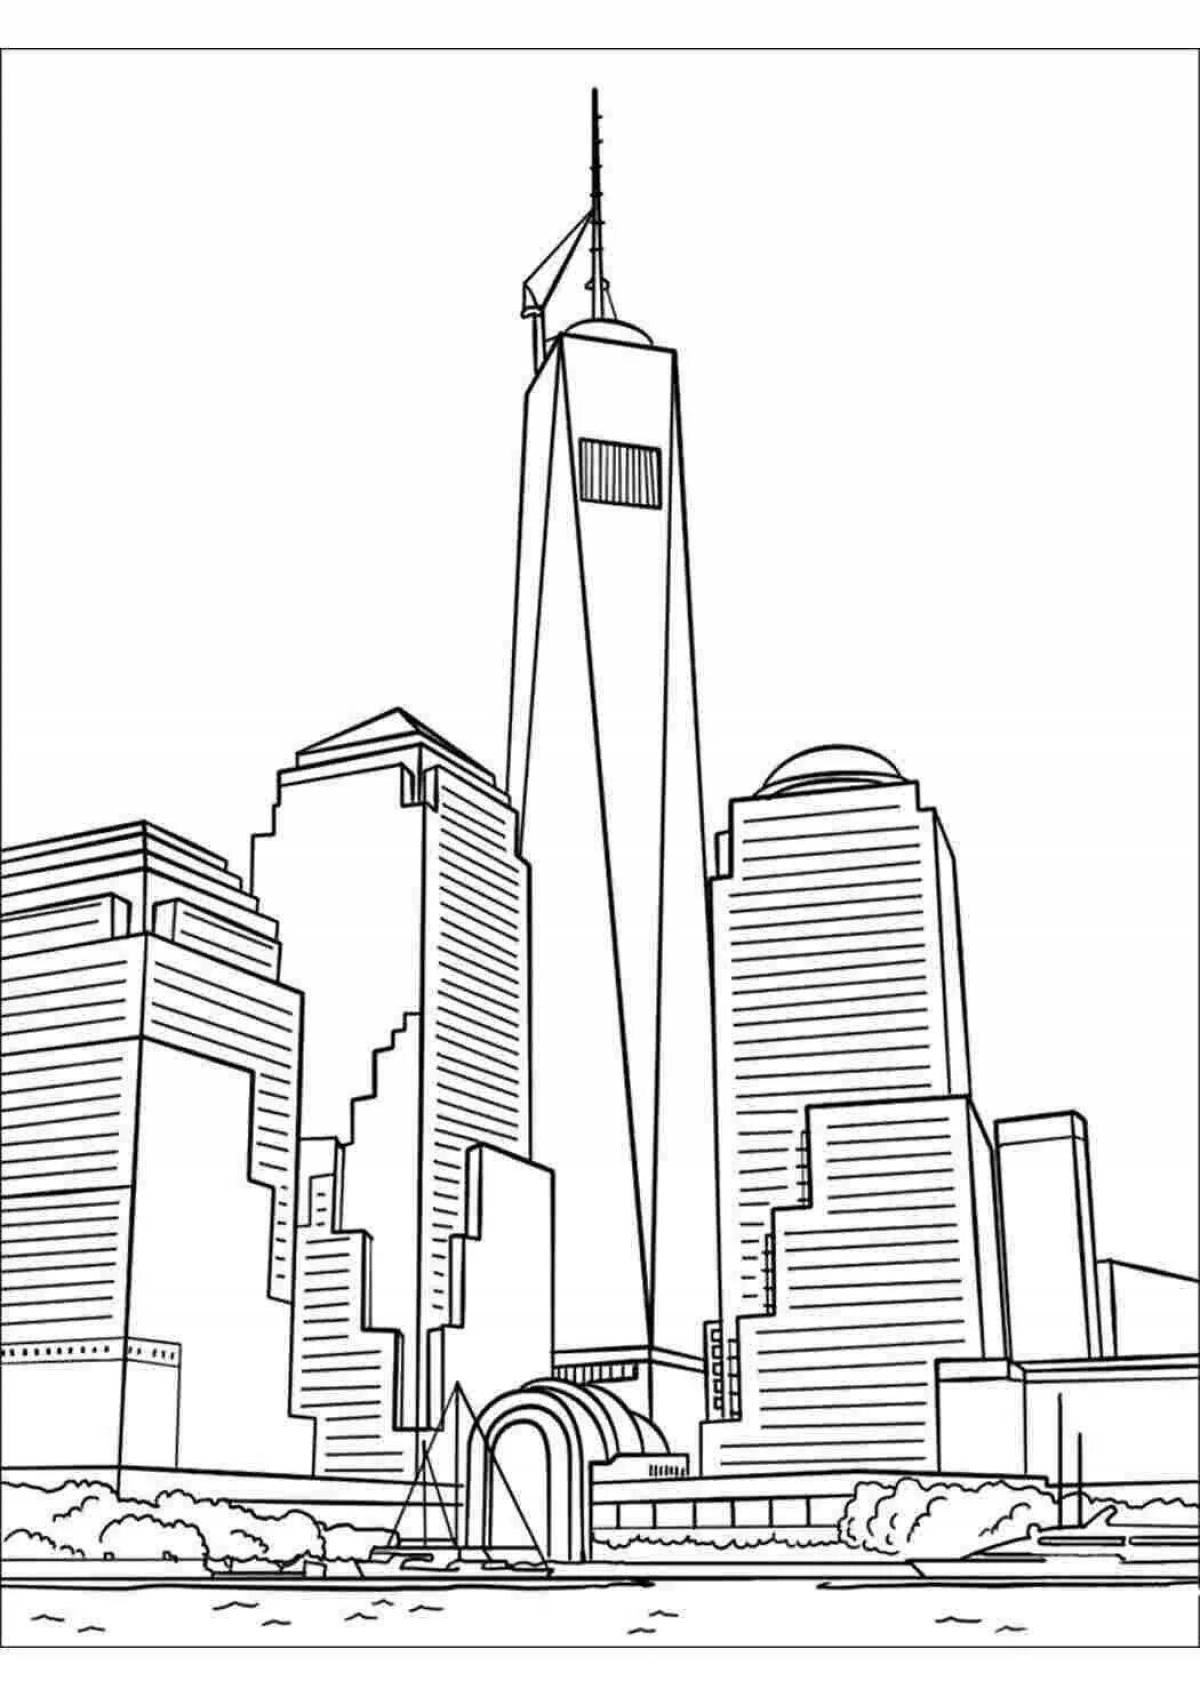 Colorfully illustrated coloring page of the twin towers